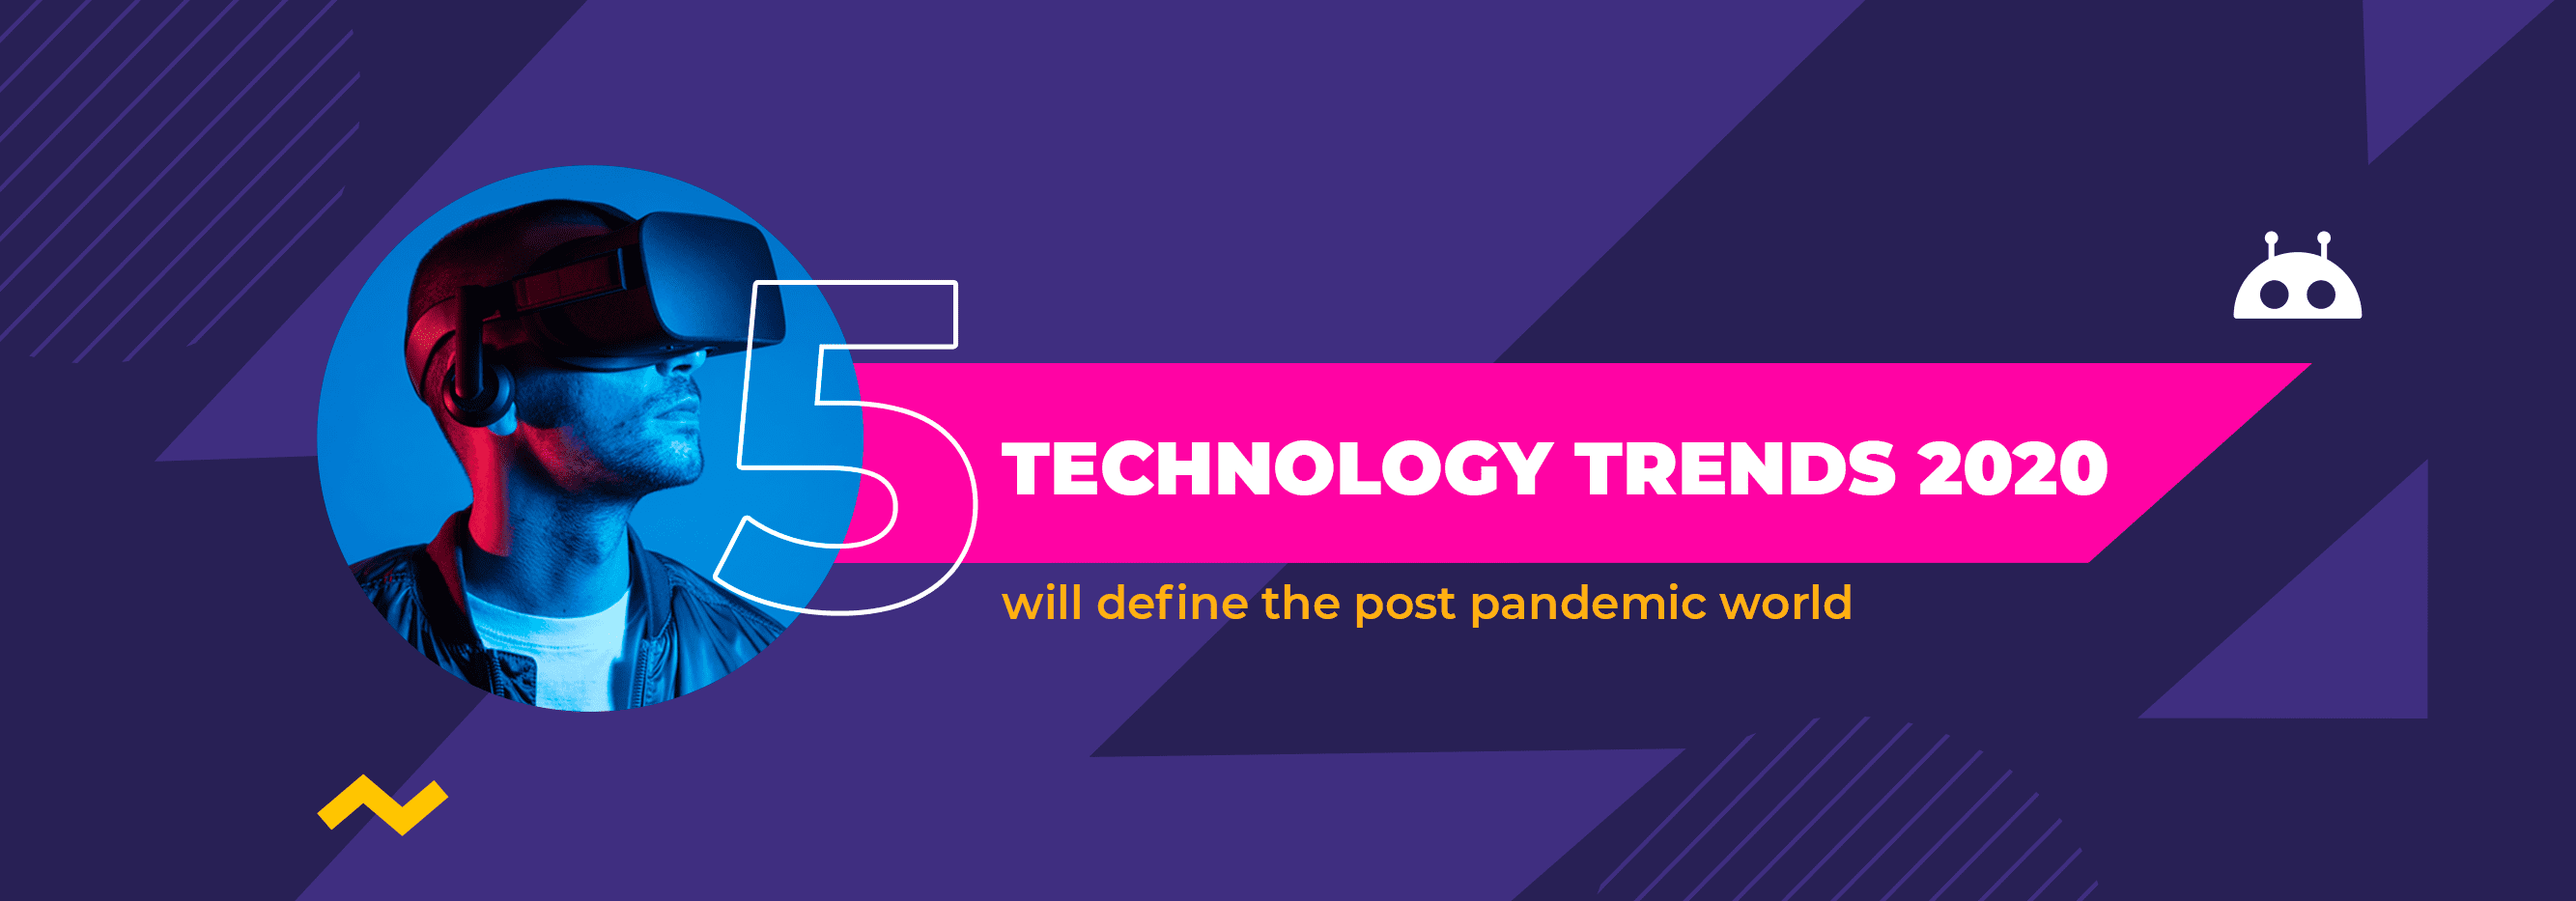 5 Technology Trends 2020 Will Define the Post Pandemic World_banner